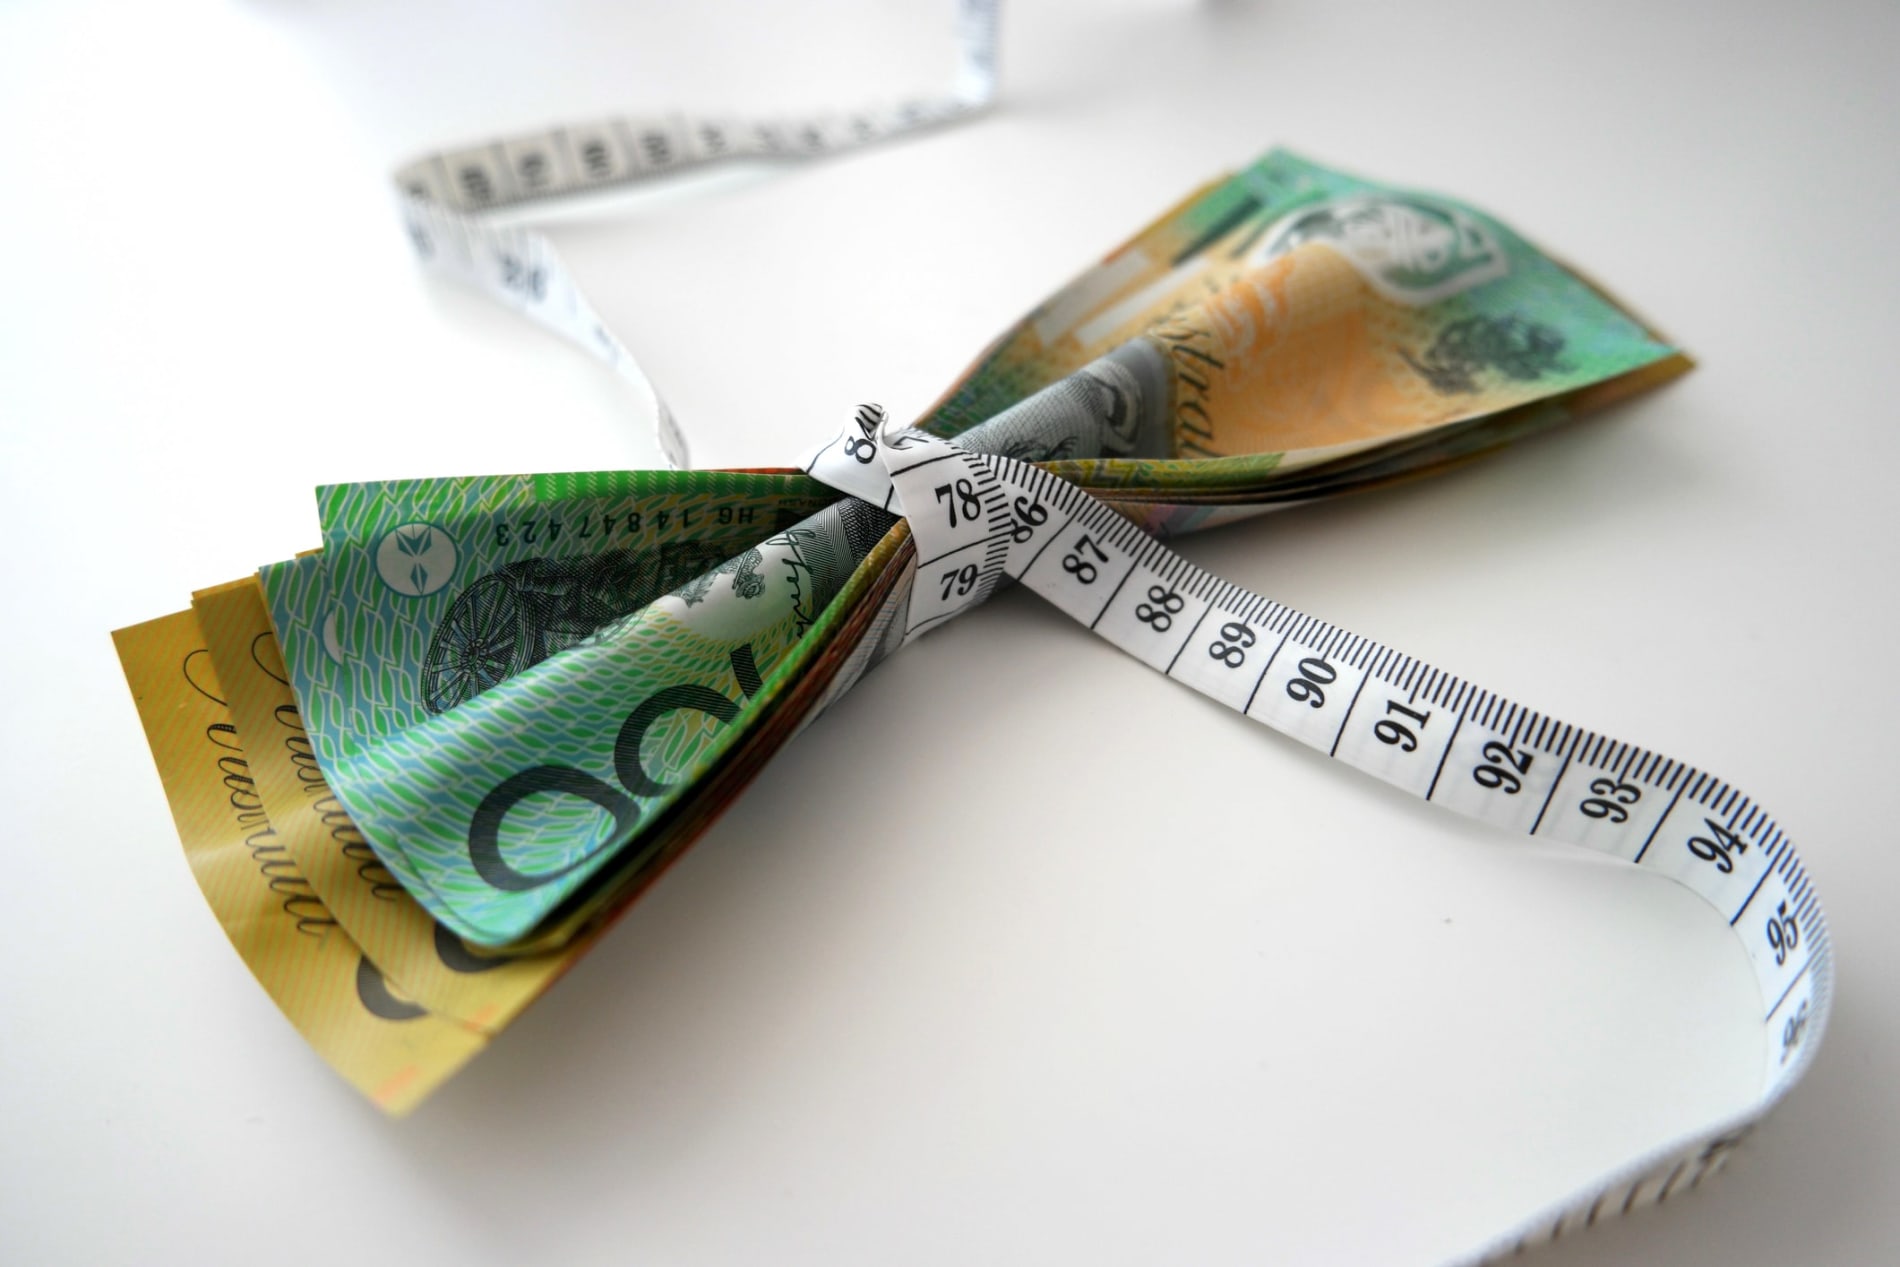 Australian banknotes squished tightly by tape measure